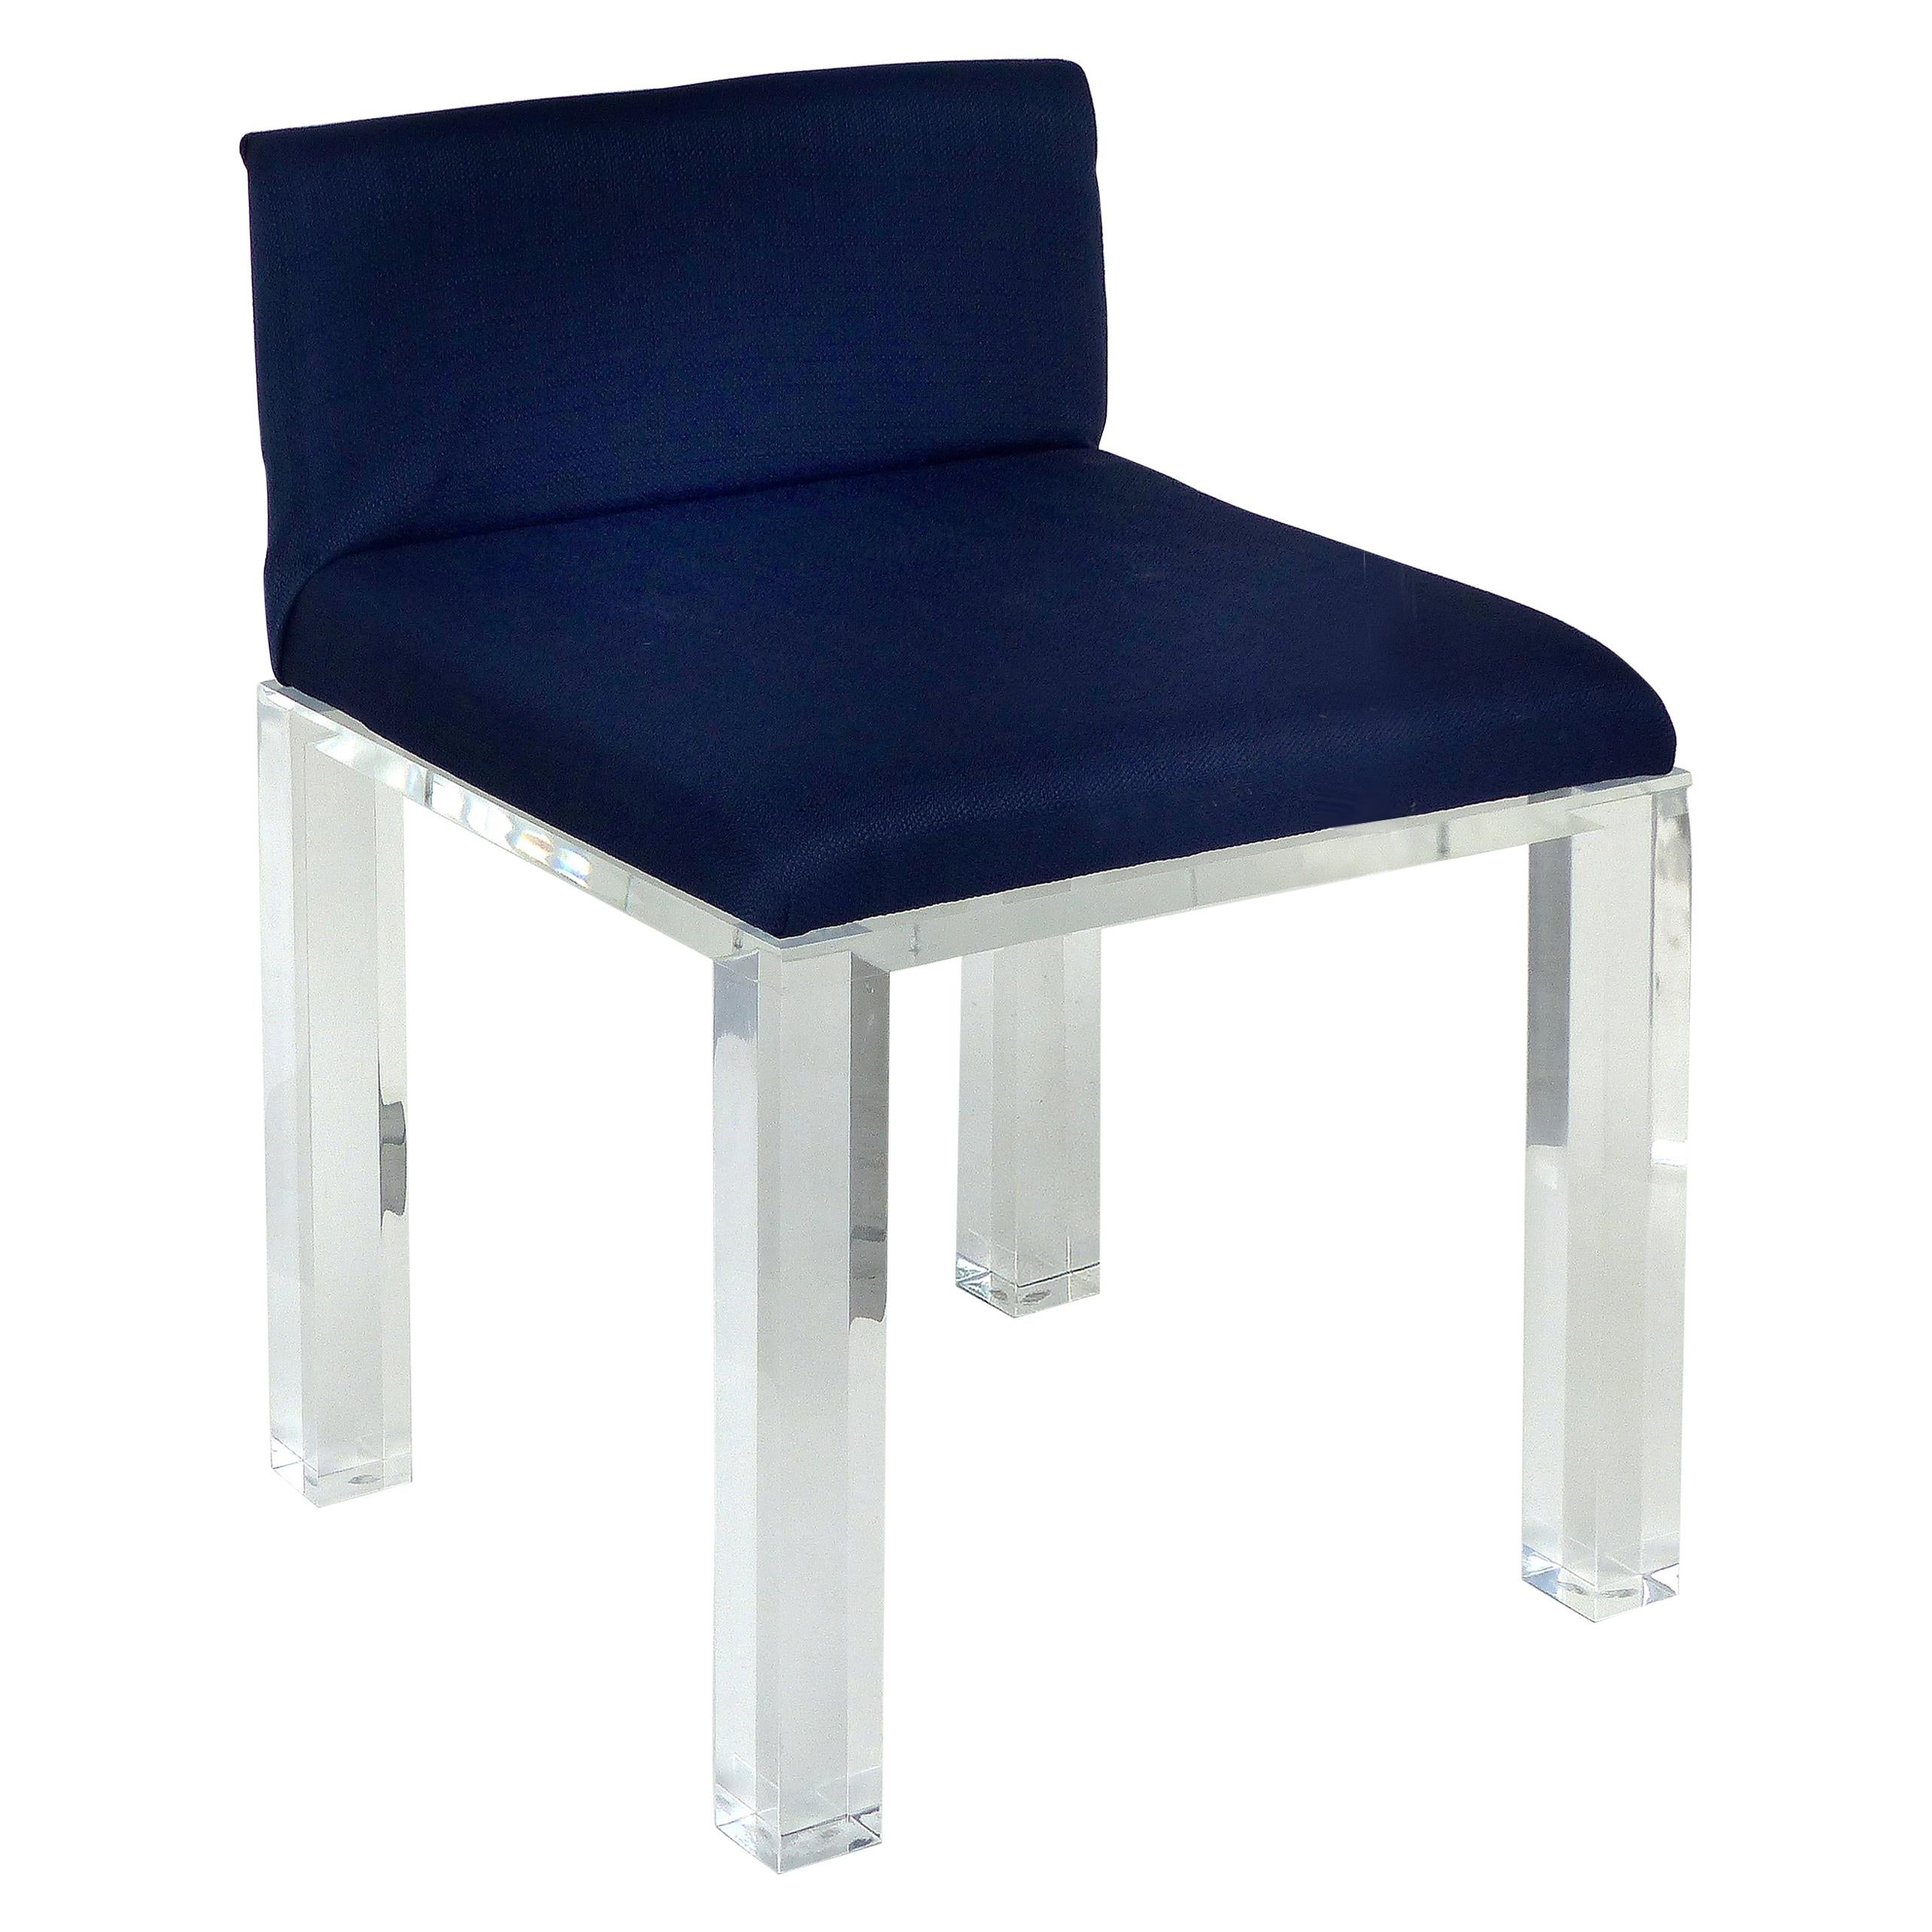 Custom Lucite Vanity Bench or Stool with Thick Lucite Legs and Upholstered Seat For Sale